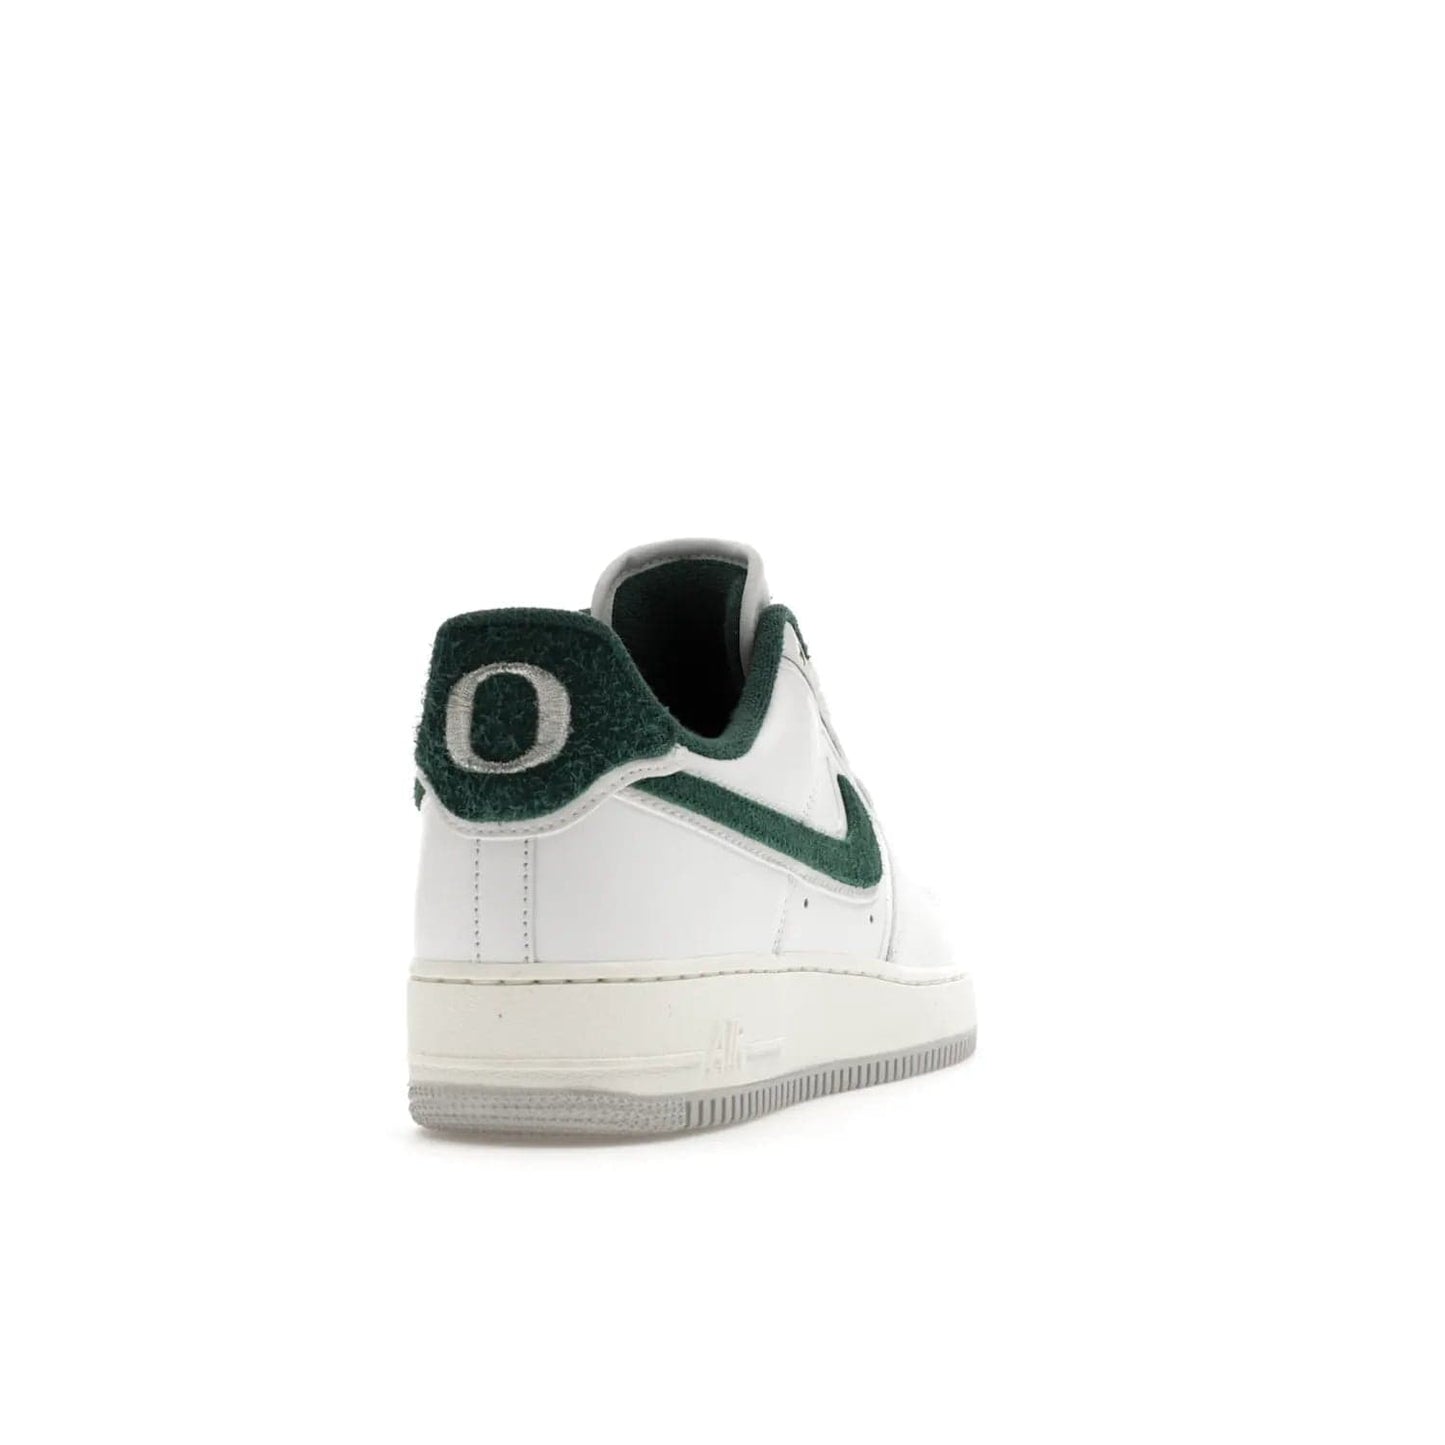 Nike Air Force 1 Low '07 Premium University of Oregon PE - Image 30 - Only at www.BallersClubKickz.com - The Nike Air Force 1 Low '07 Premium. Special Oregon University colorway. White base with green and sail accents. Cushioned rubber midsole. Comfort and style. Support your school!